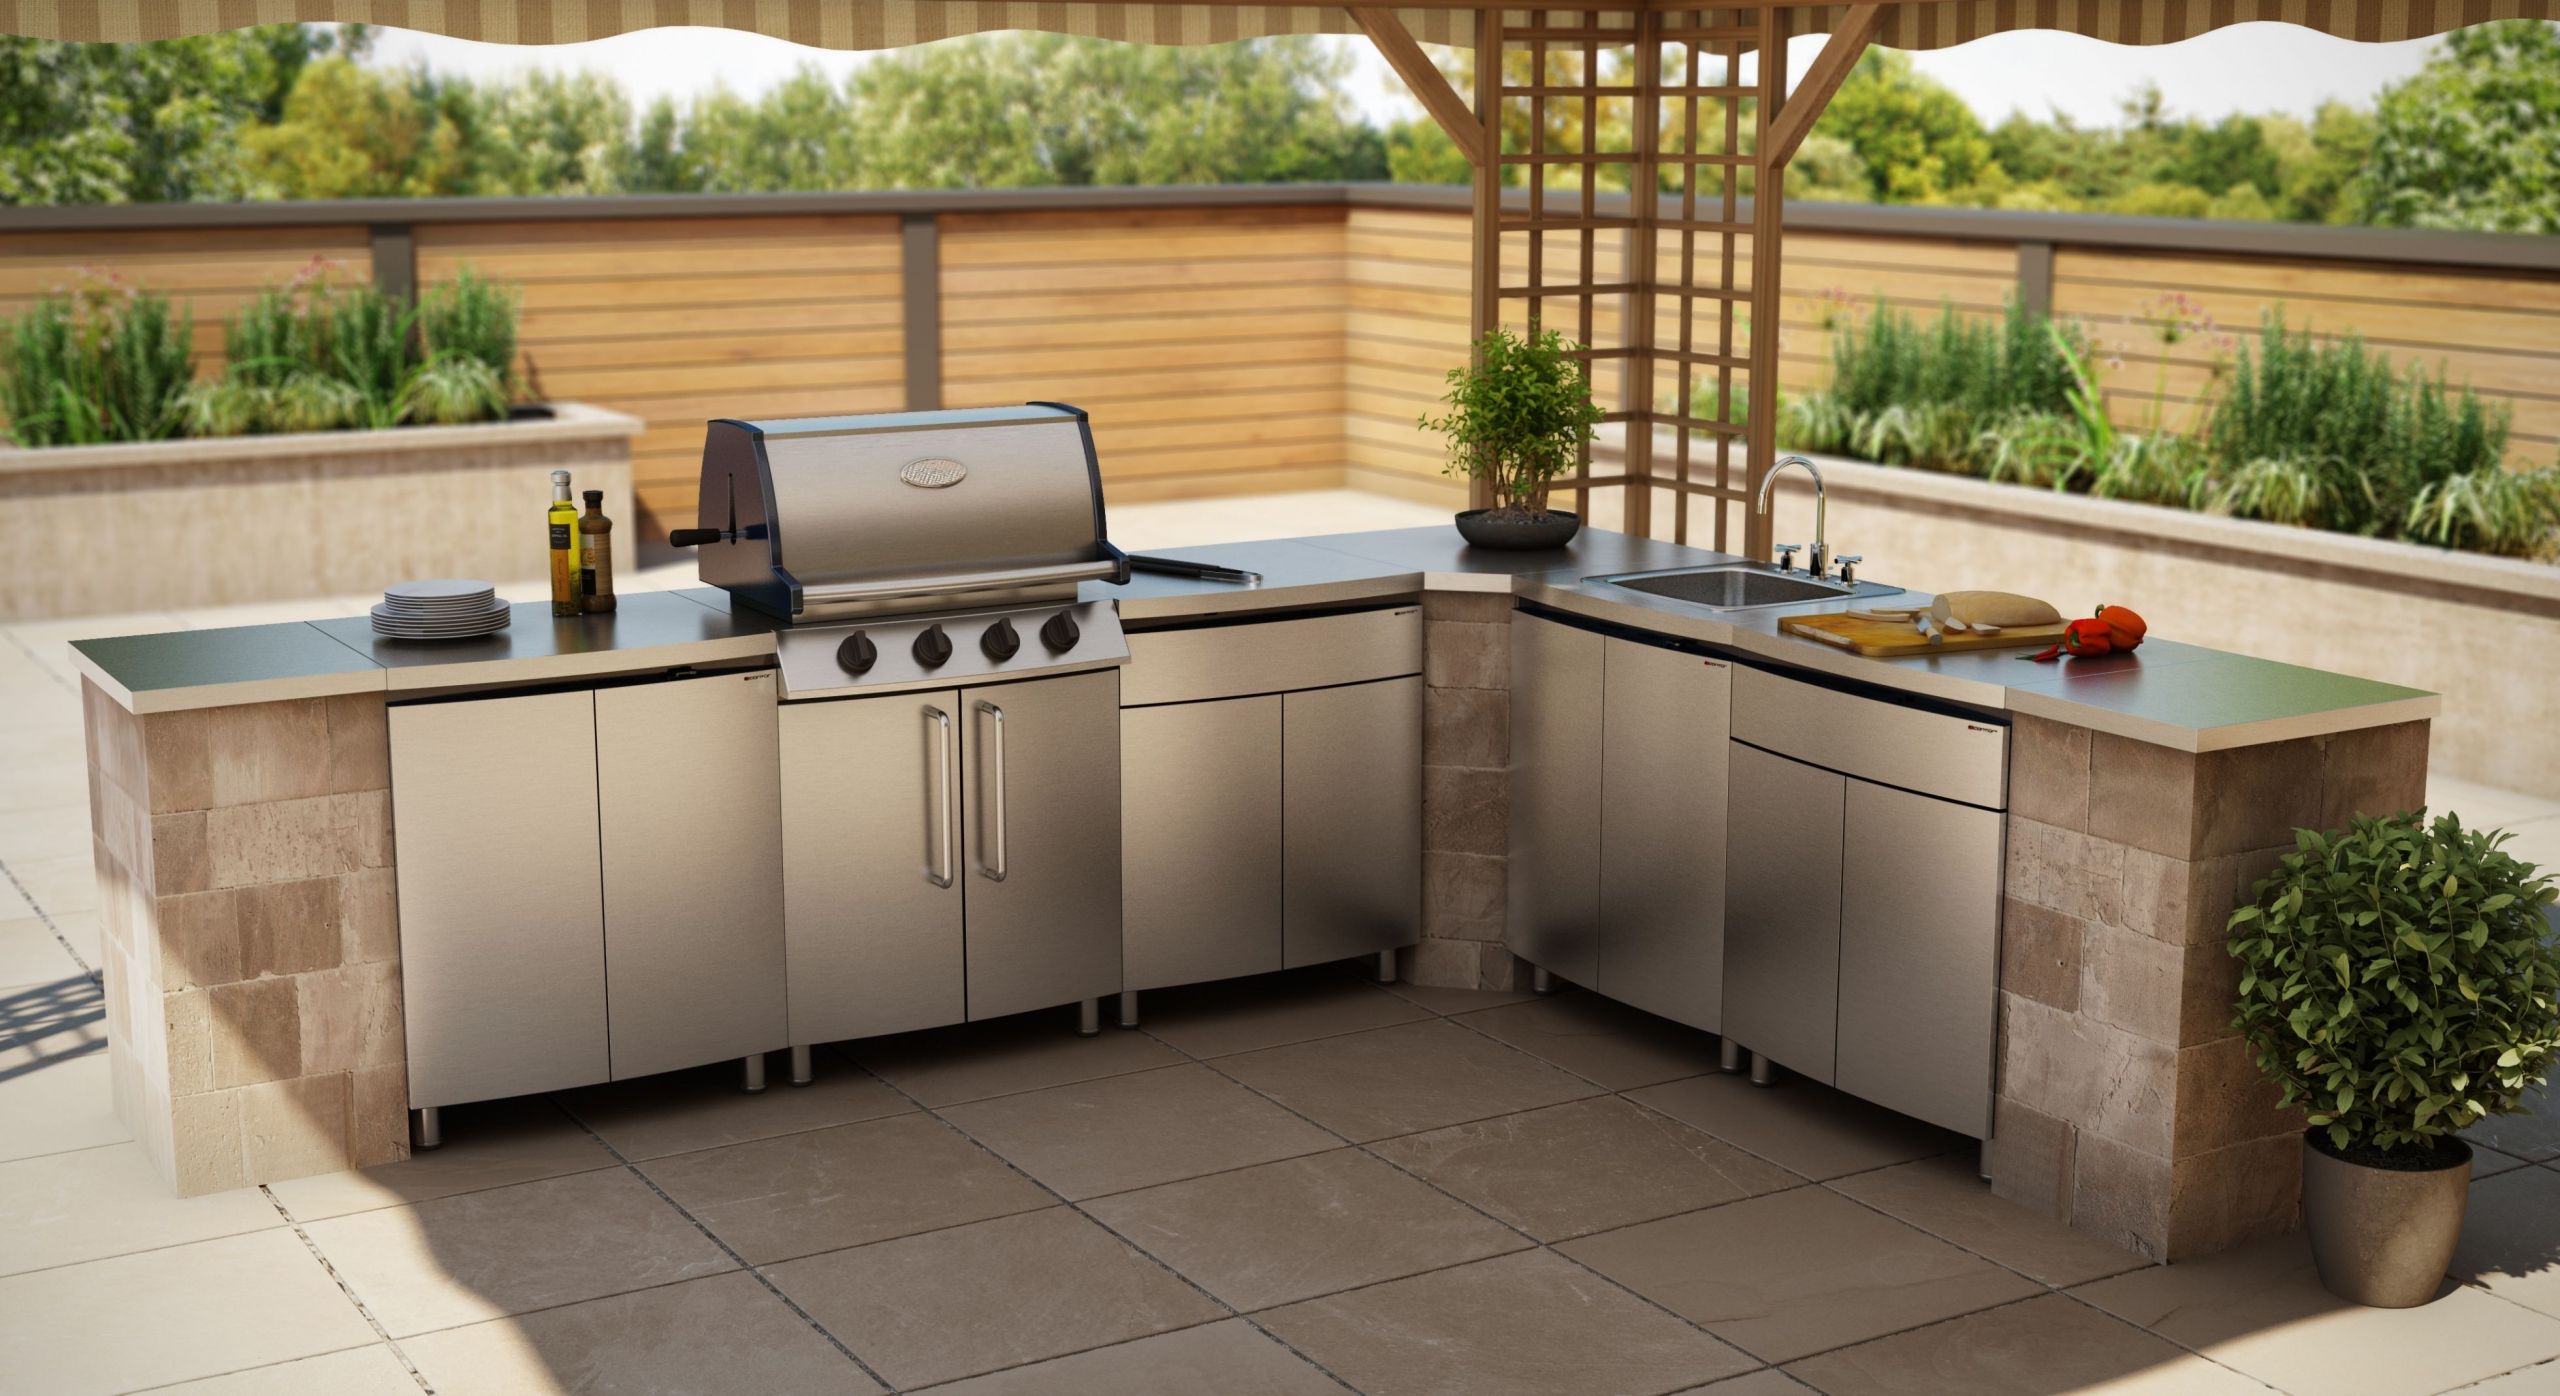 Stainless Steel Outdoor Kitchens
 Stainless Steel Outdoor Kitchen Cabinets